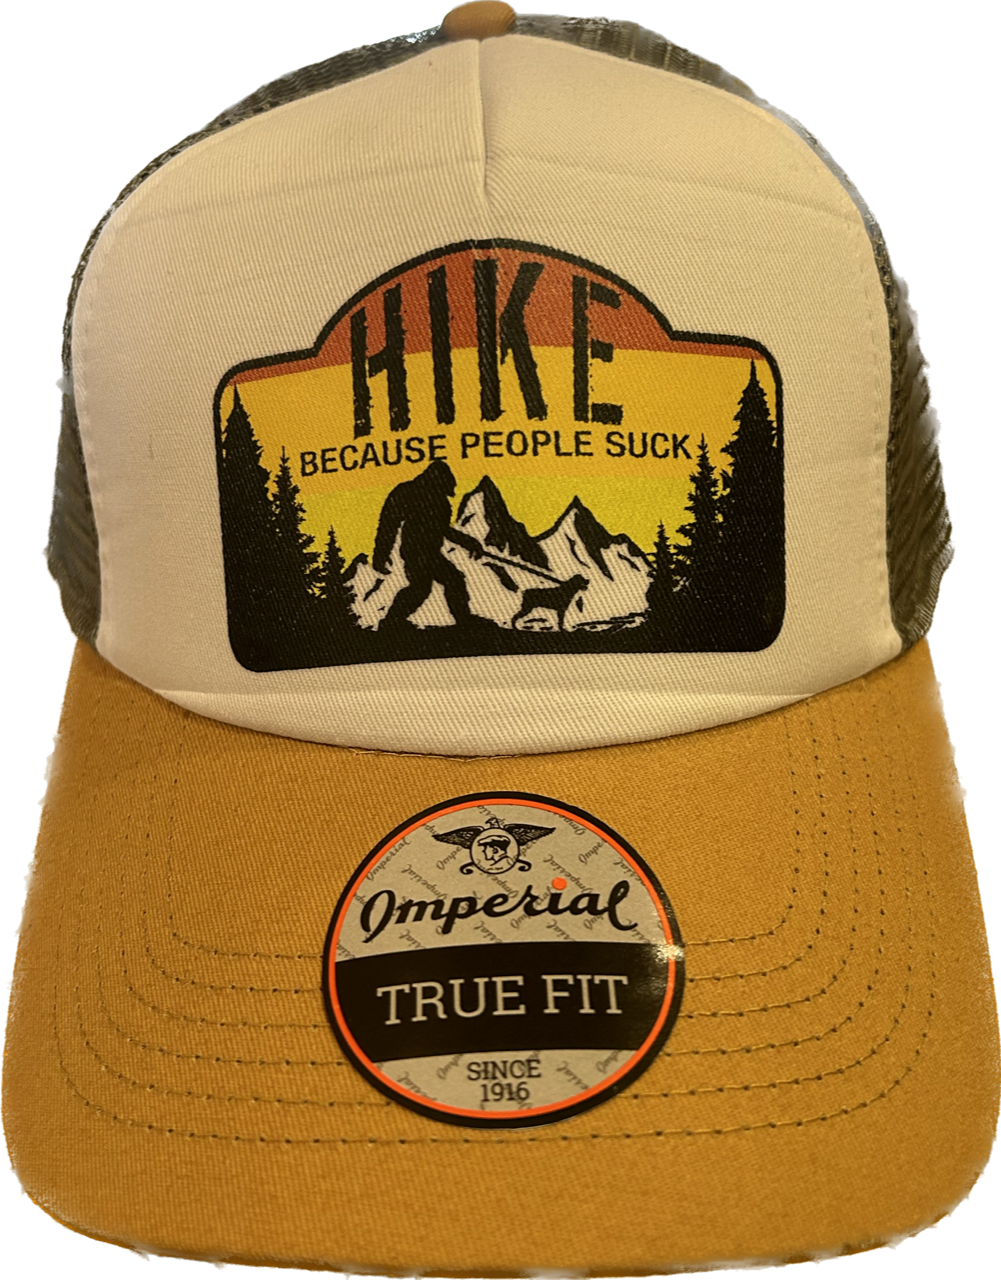 Hike because people suck Hats